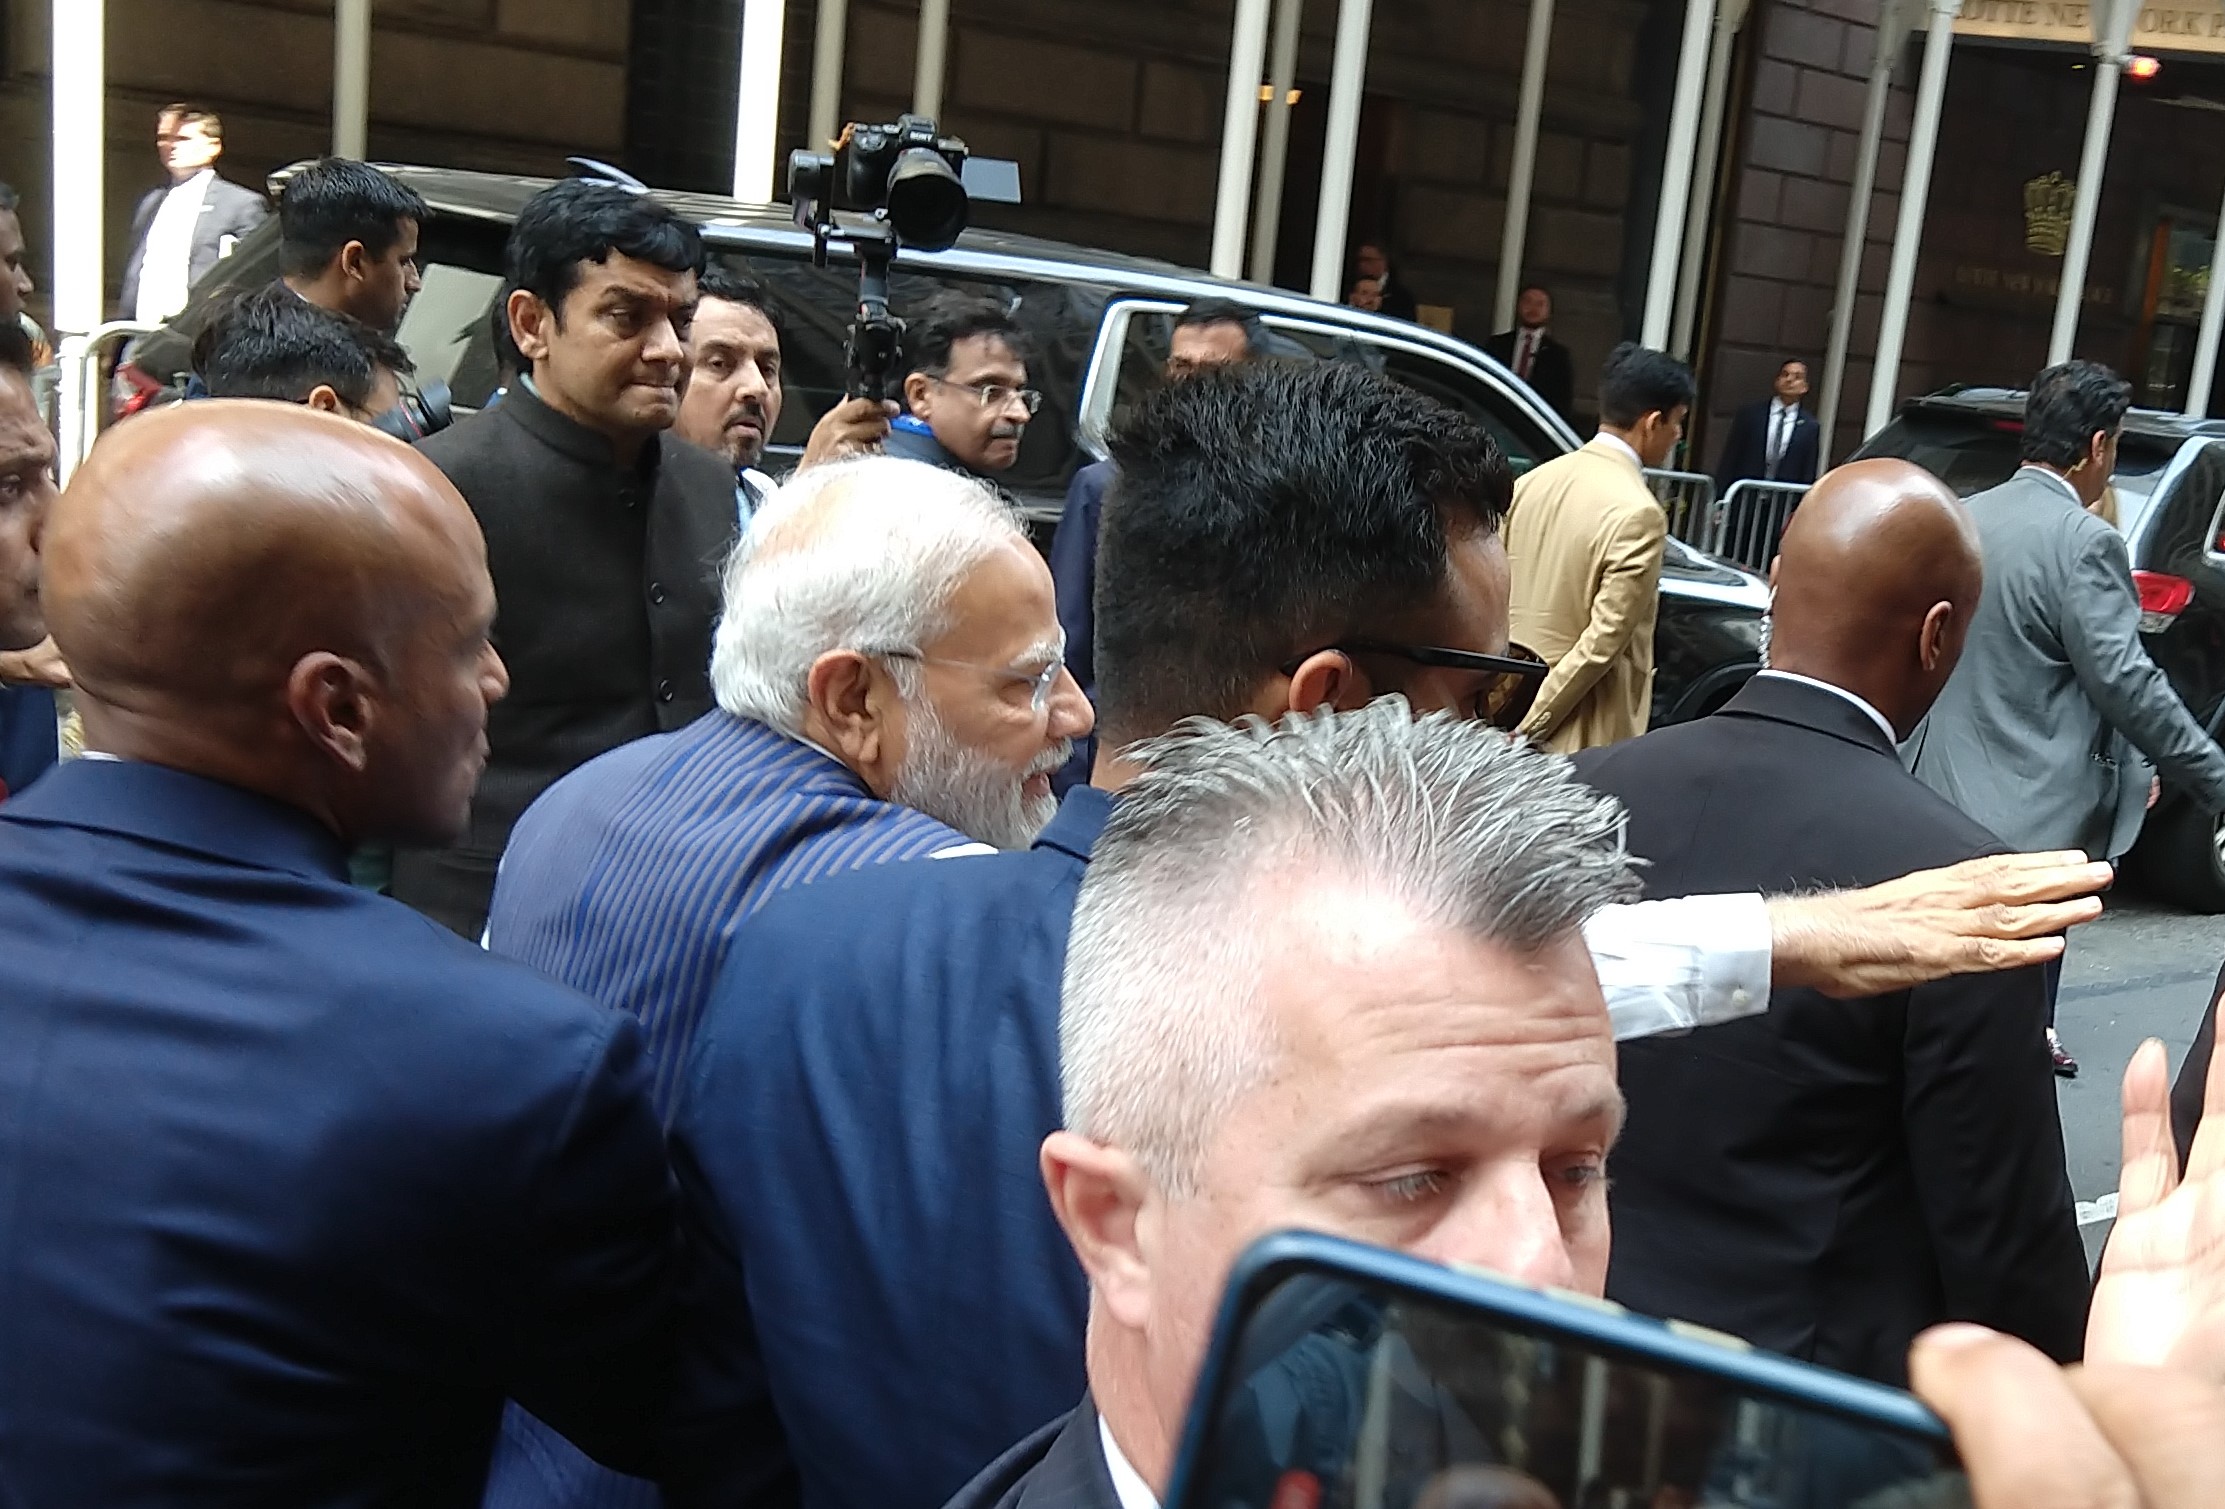 Prime Minister Narendra Modi greets supporters outside his hotel in New York on Tuesday, June 20, 2023 as worried Secret Service agents and other security personnel hem him in as he flouts security measures. (Photo: Arul Louis)